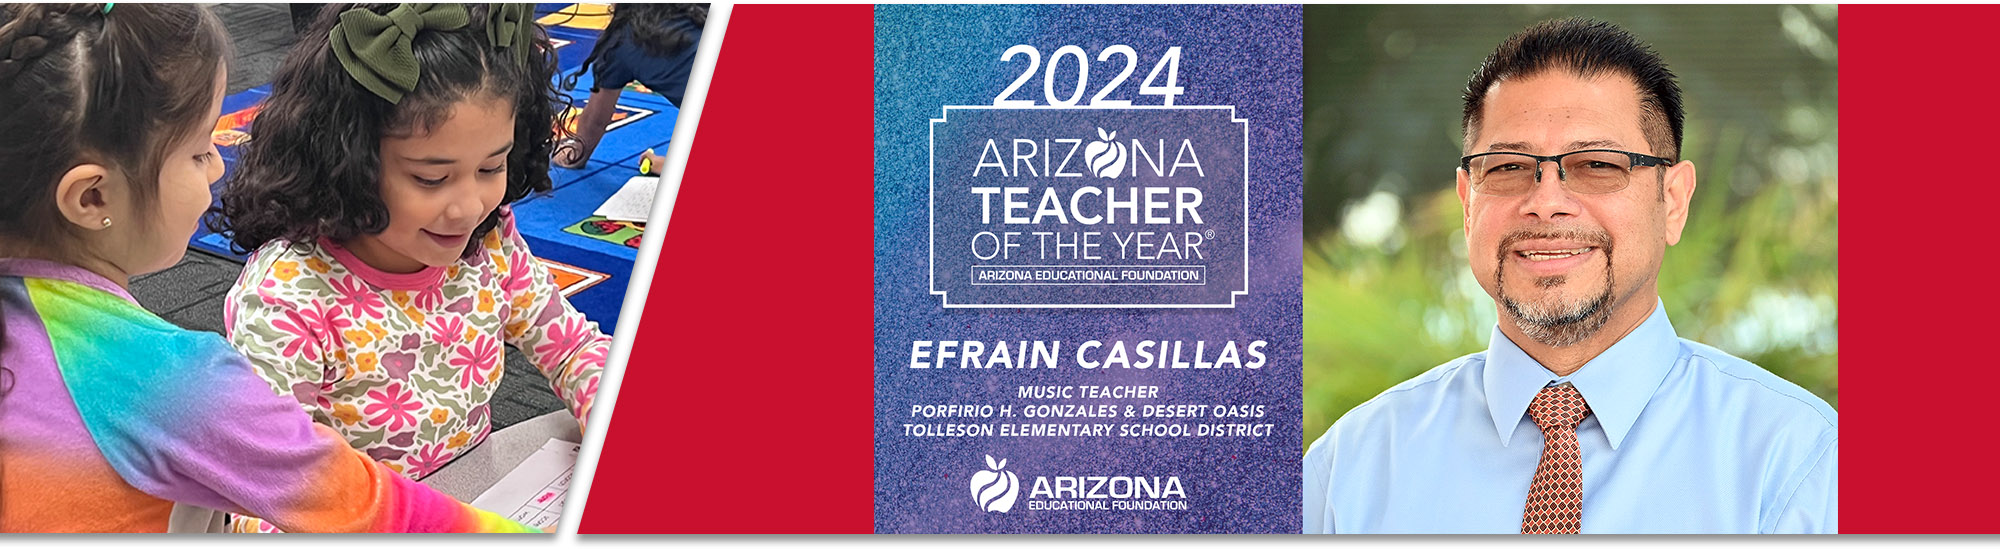 Two girls working at a desk together and our teacher Mr. Efrain Casillas being named 2024 Arizona Teacher of the Year!